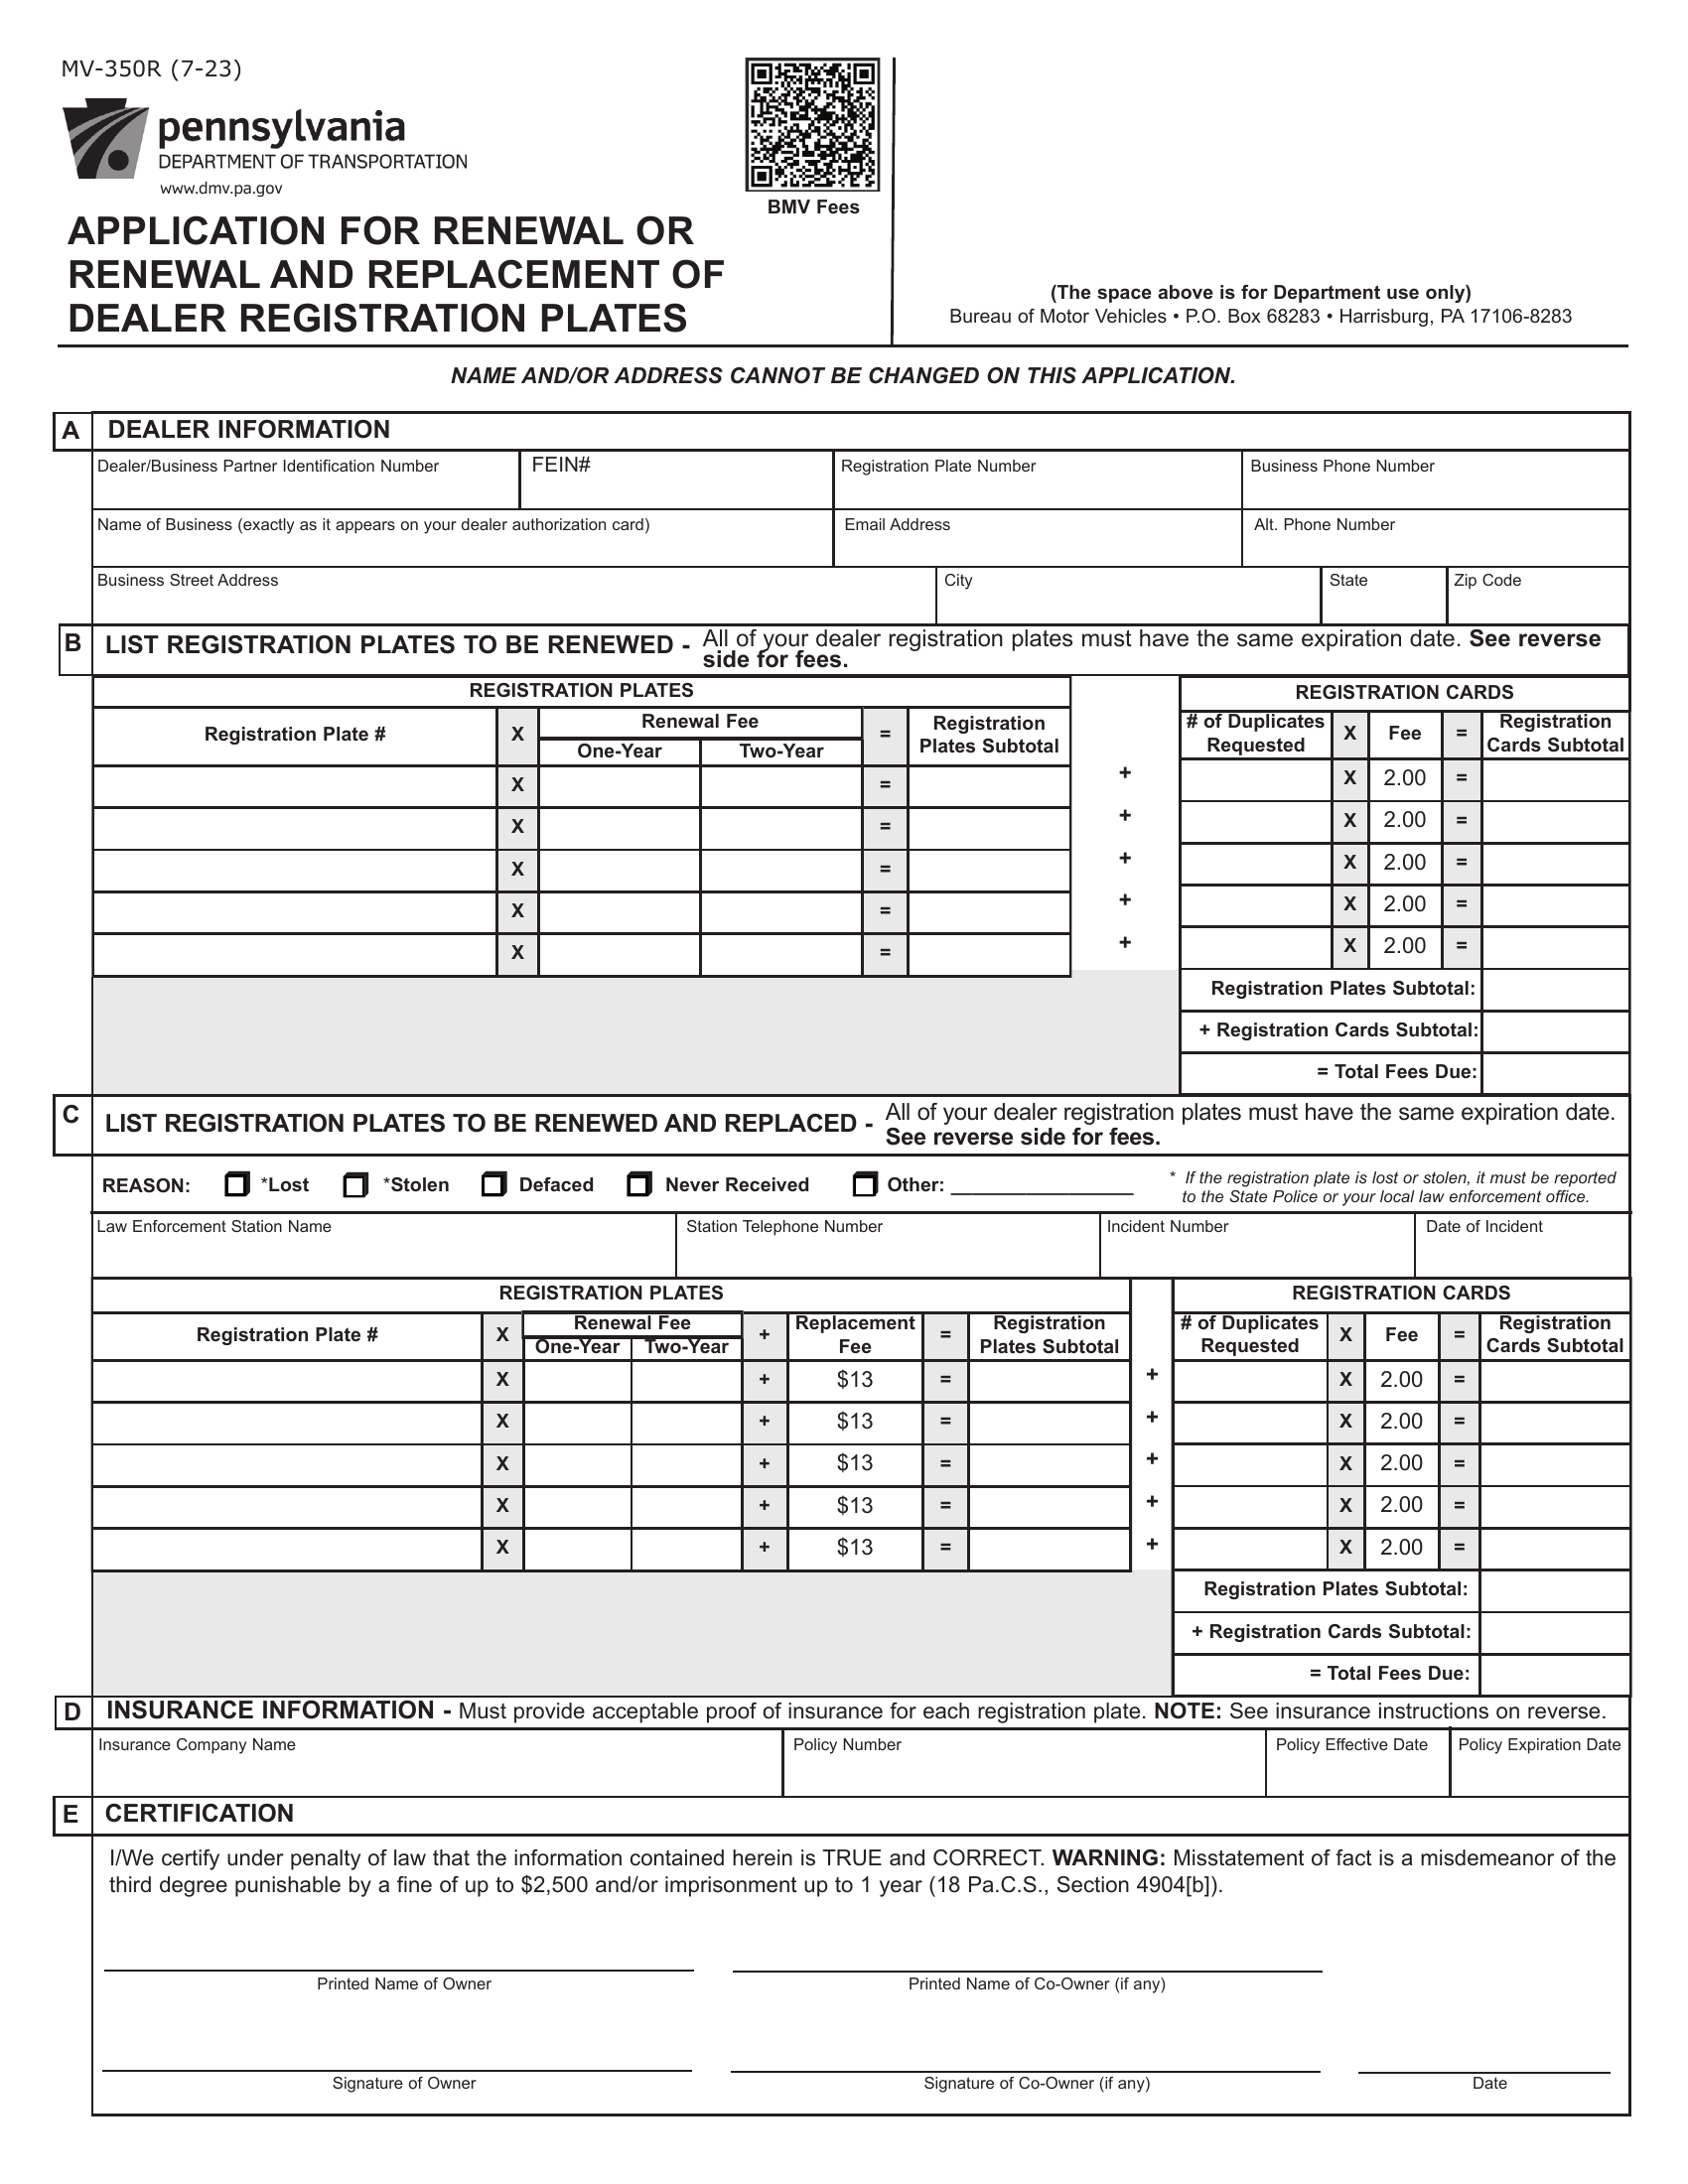 Pa Dmv Form Mv 350r Renewal Or Replacement Request Of Dealer